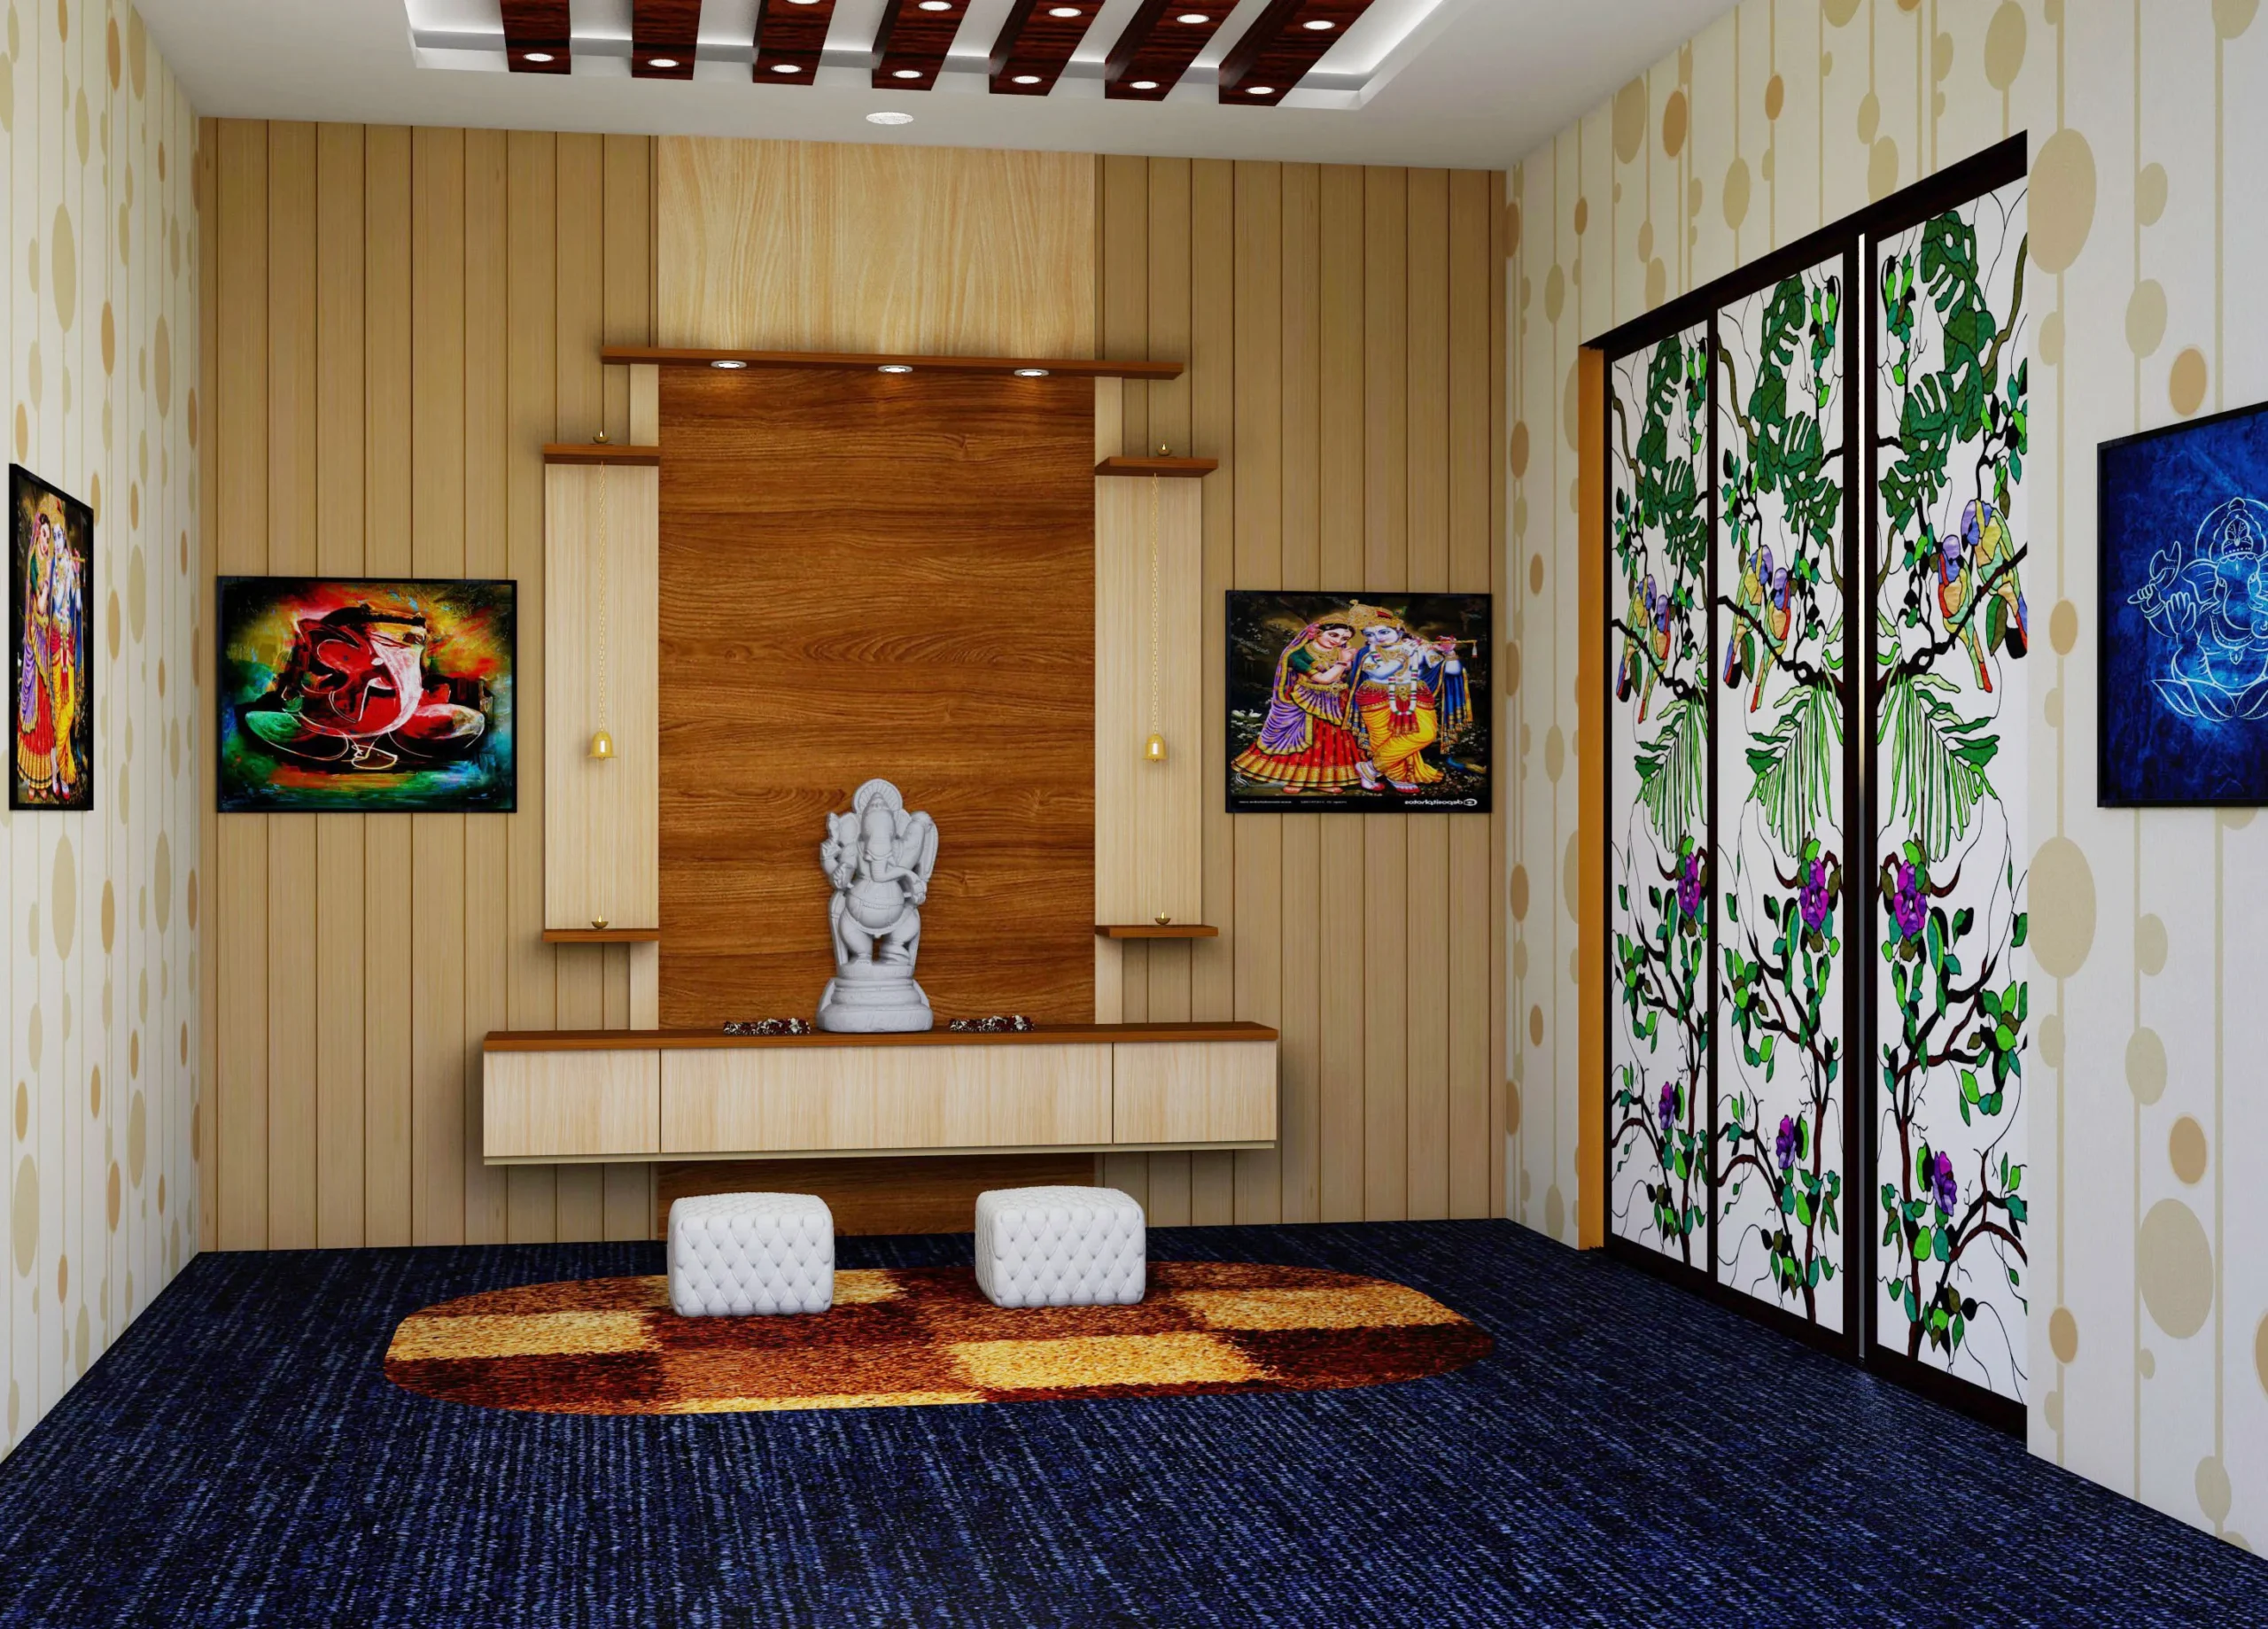 Interior designs for temple with wooden paneling